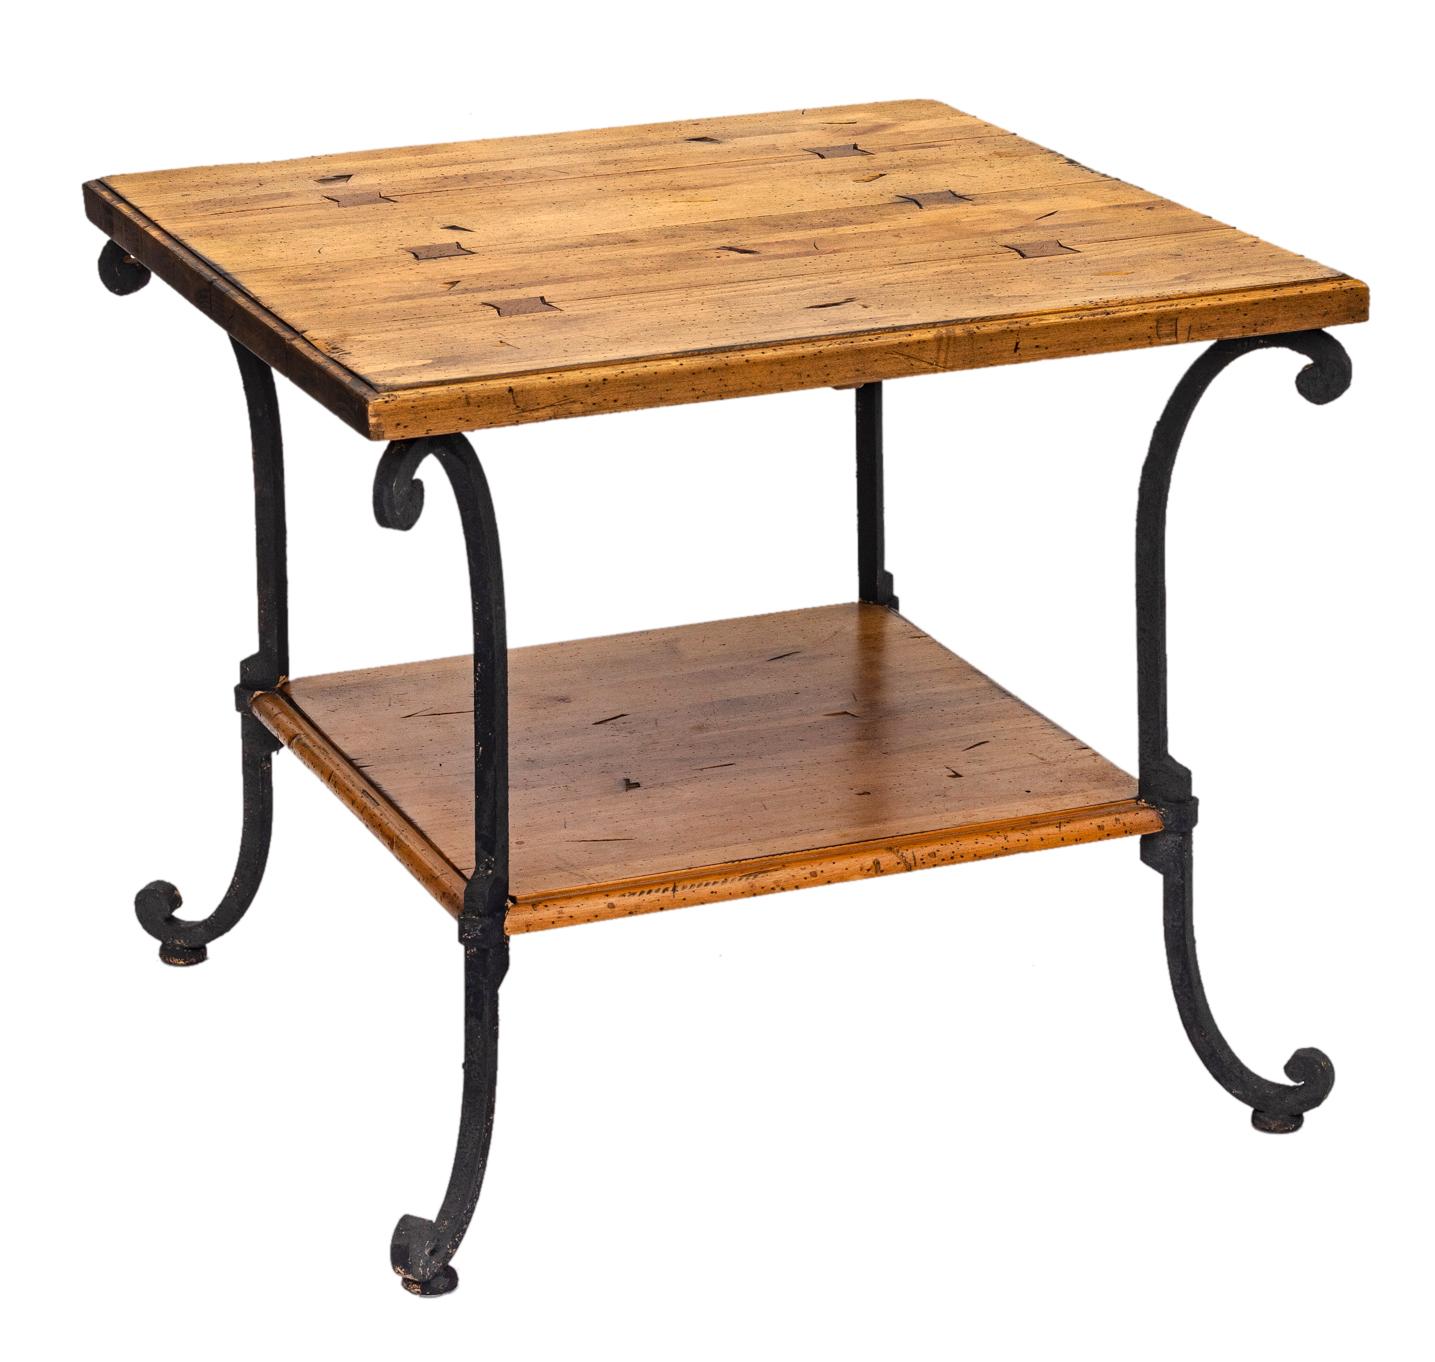 Handcrafted pine table with handwrought iron frame & lower shelf.
Finished in a smooth natural brown distressed finish on the wrought iron legs & frame.
Manufactured using time-honored techniques to create a superbly crafted old-world reproduction.